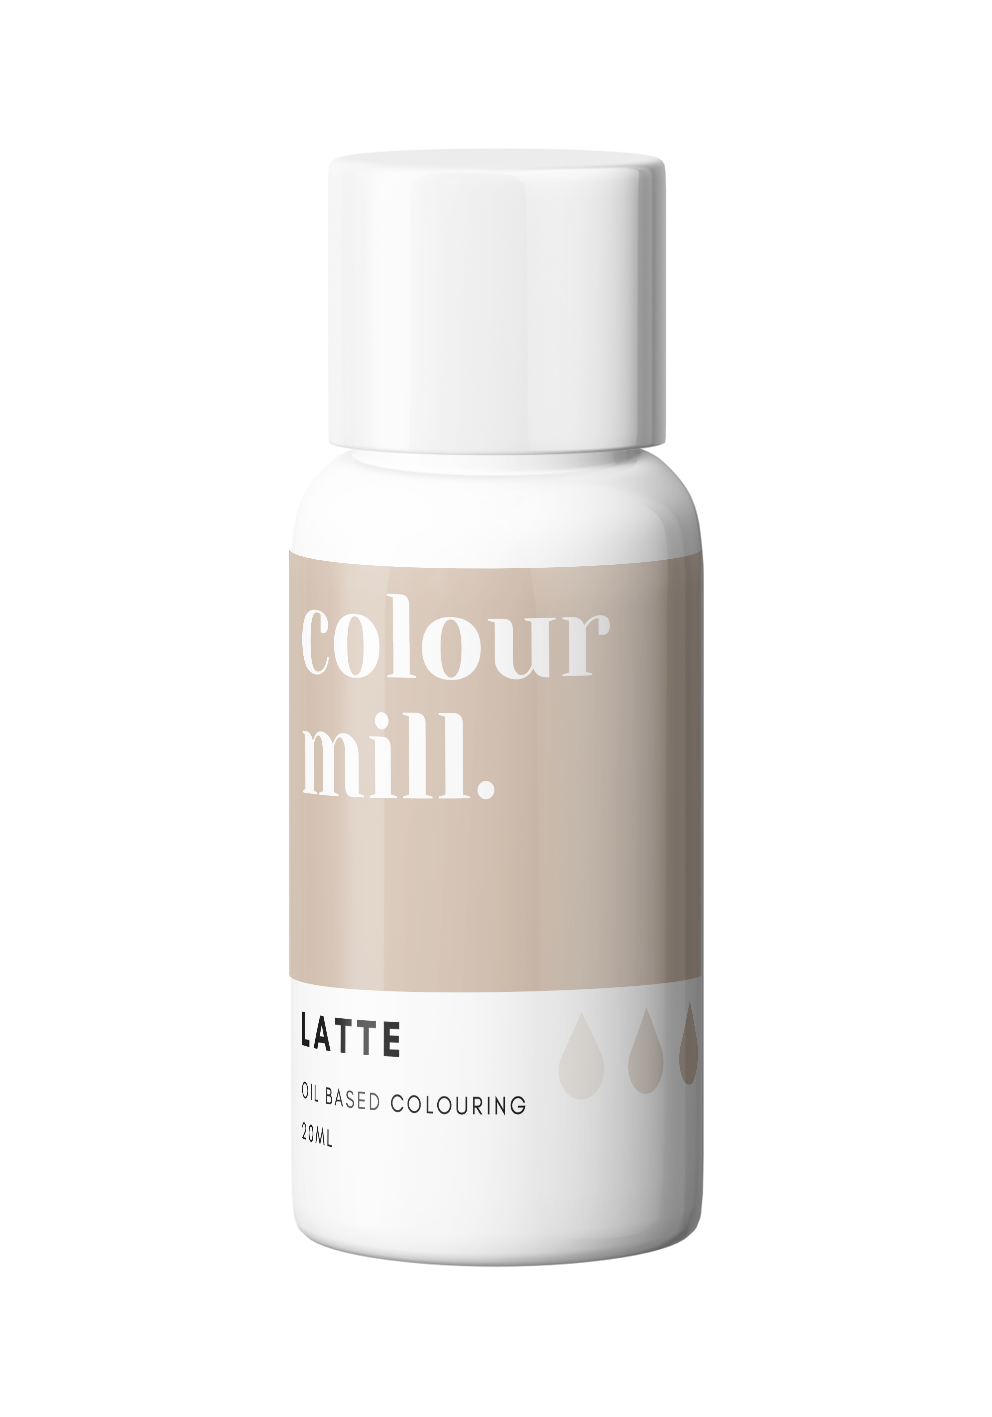 Latte Colour Mill Icing Colouring - 20ml